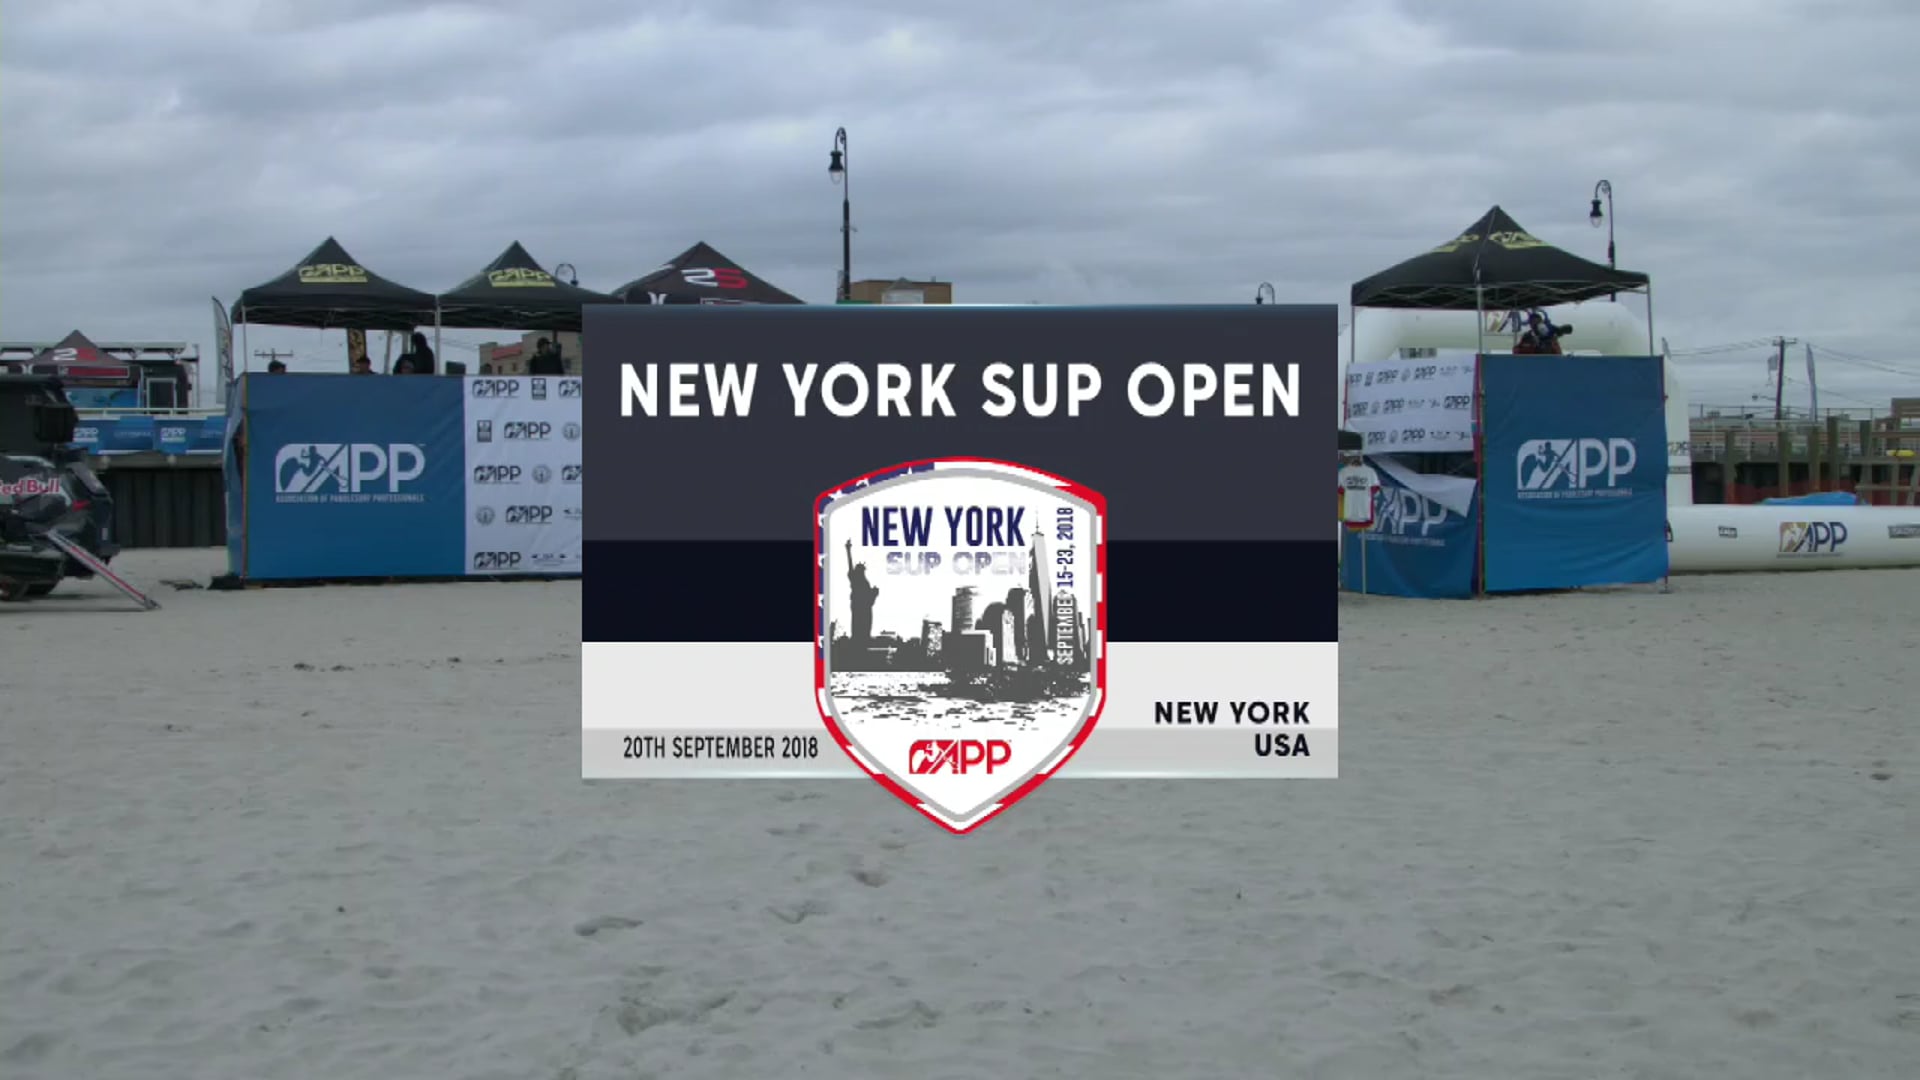 NY SUP OPEN - SURF DAY 2